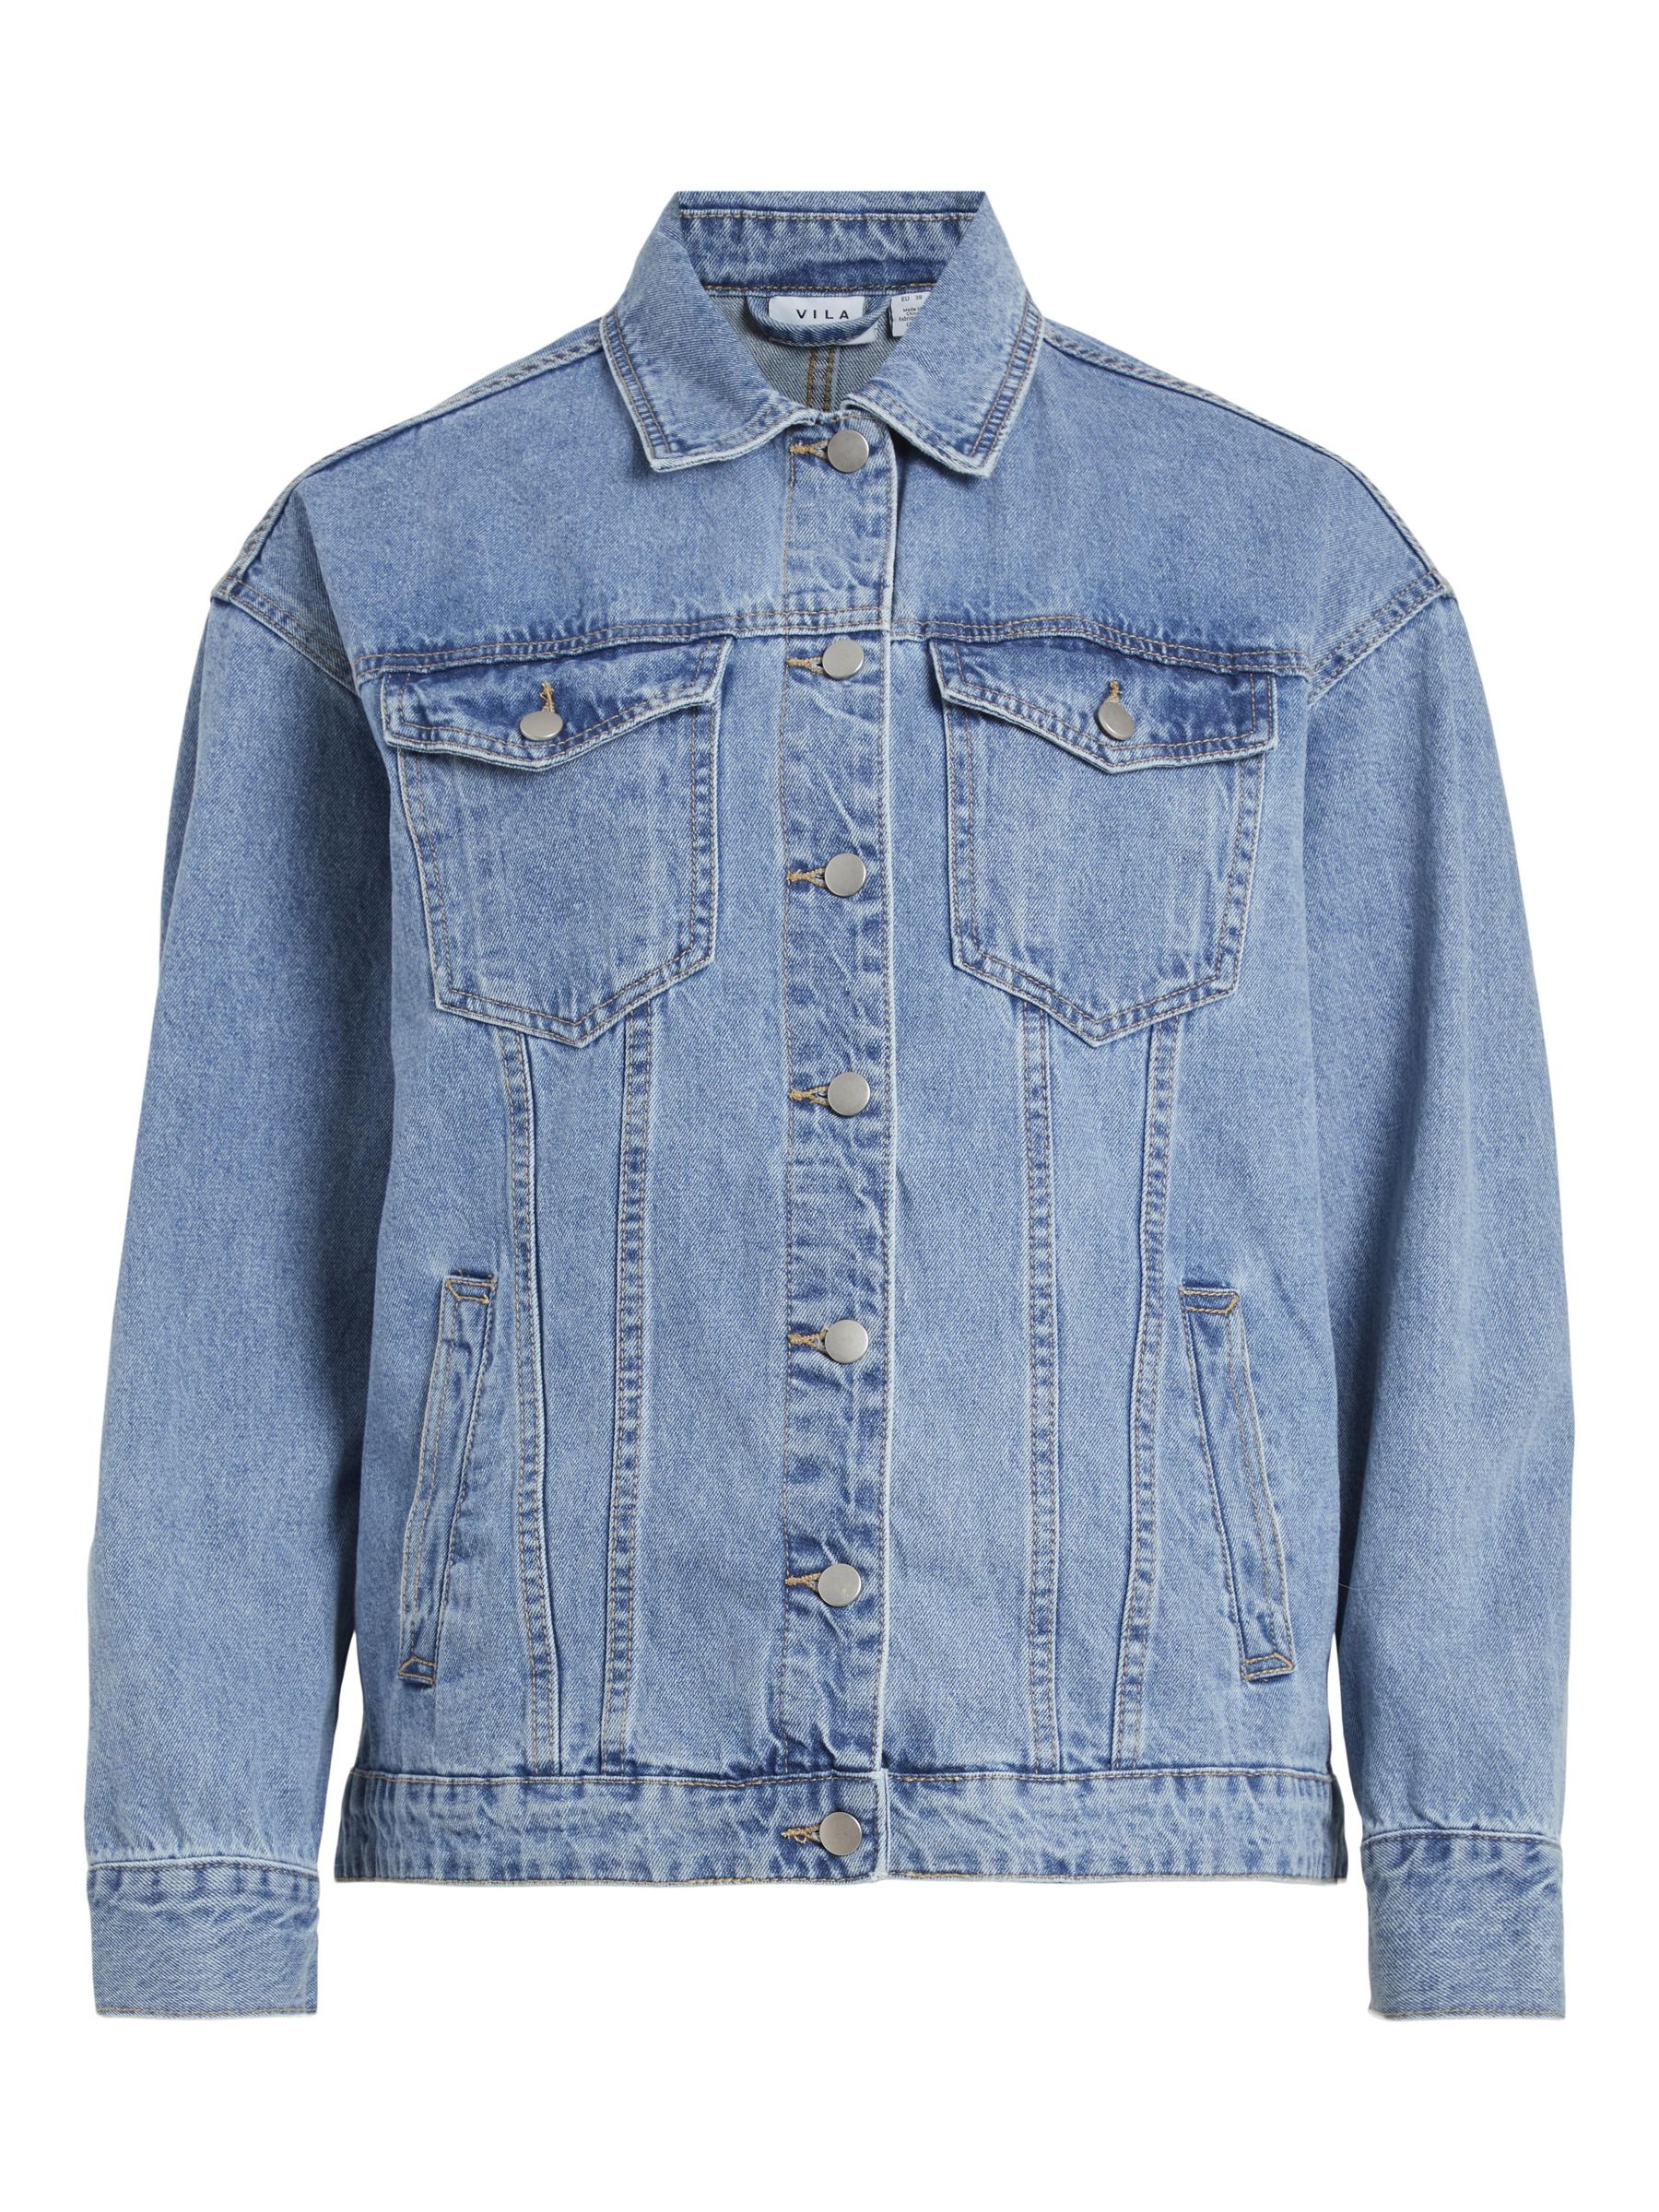 Does anybody know a cheaper version for this denim jacket? I